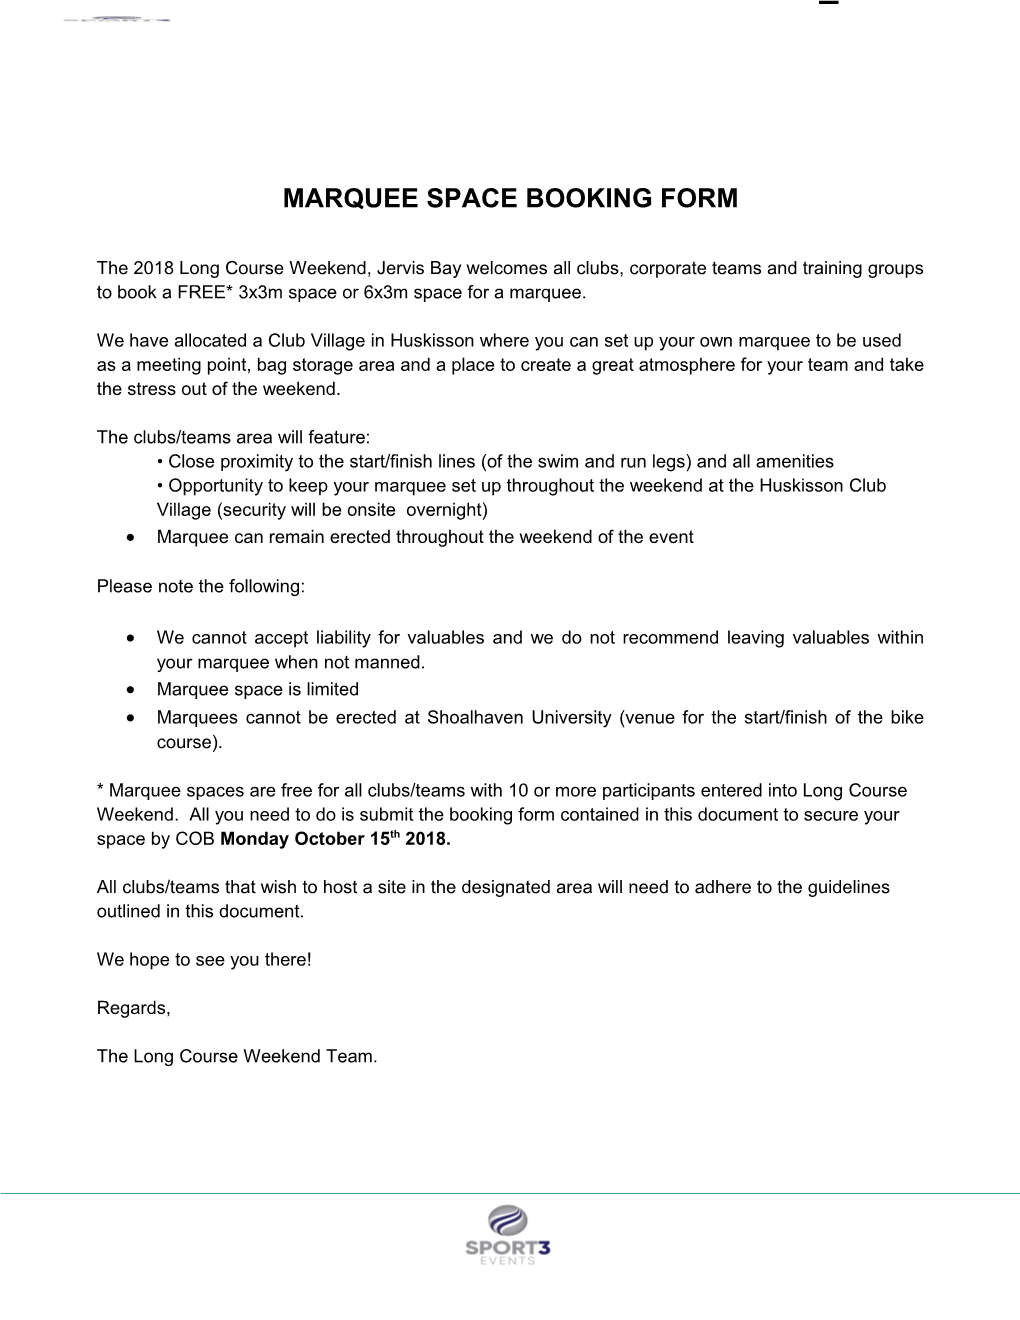 Marquee Space Booking Form